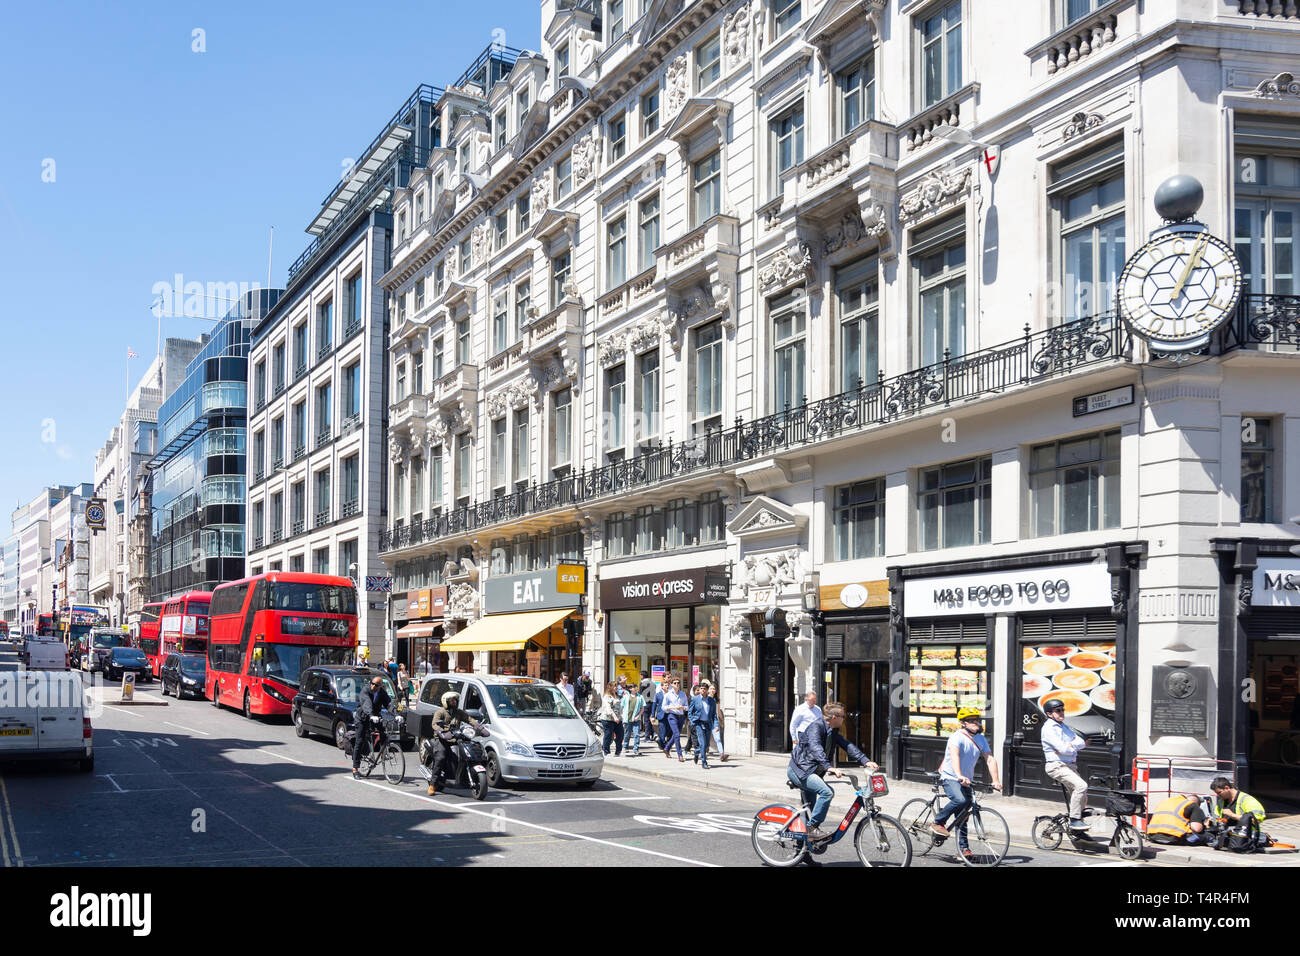 Fleet Street, Ludgate Circus, City of London, Greater London, Angleterre, Royaume-Uni Banque D'Images